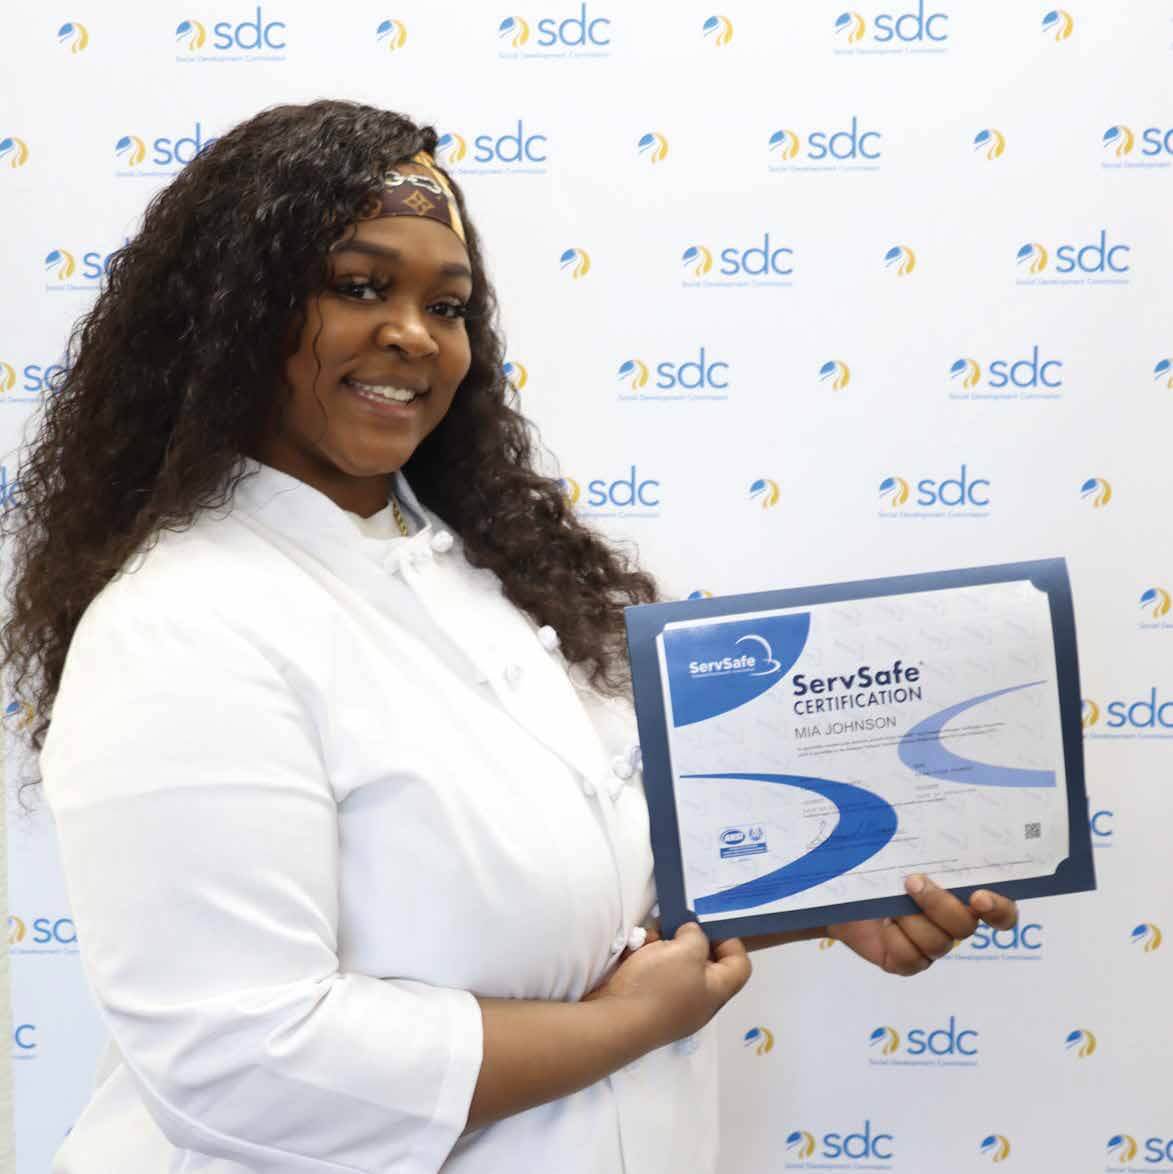 Woman smiling with certification